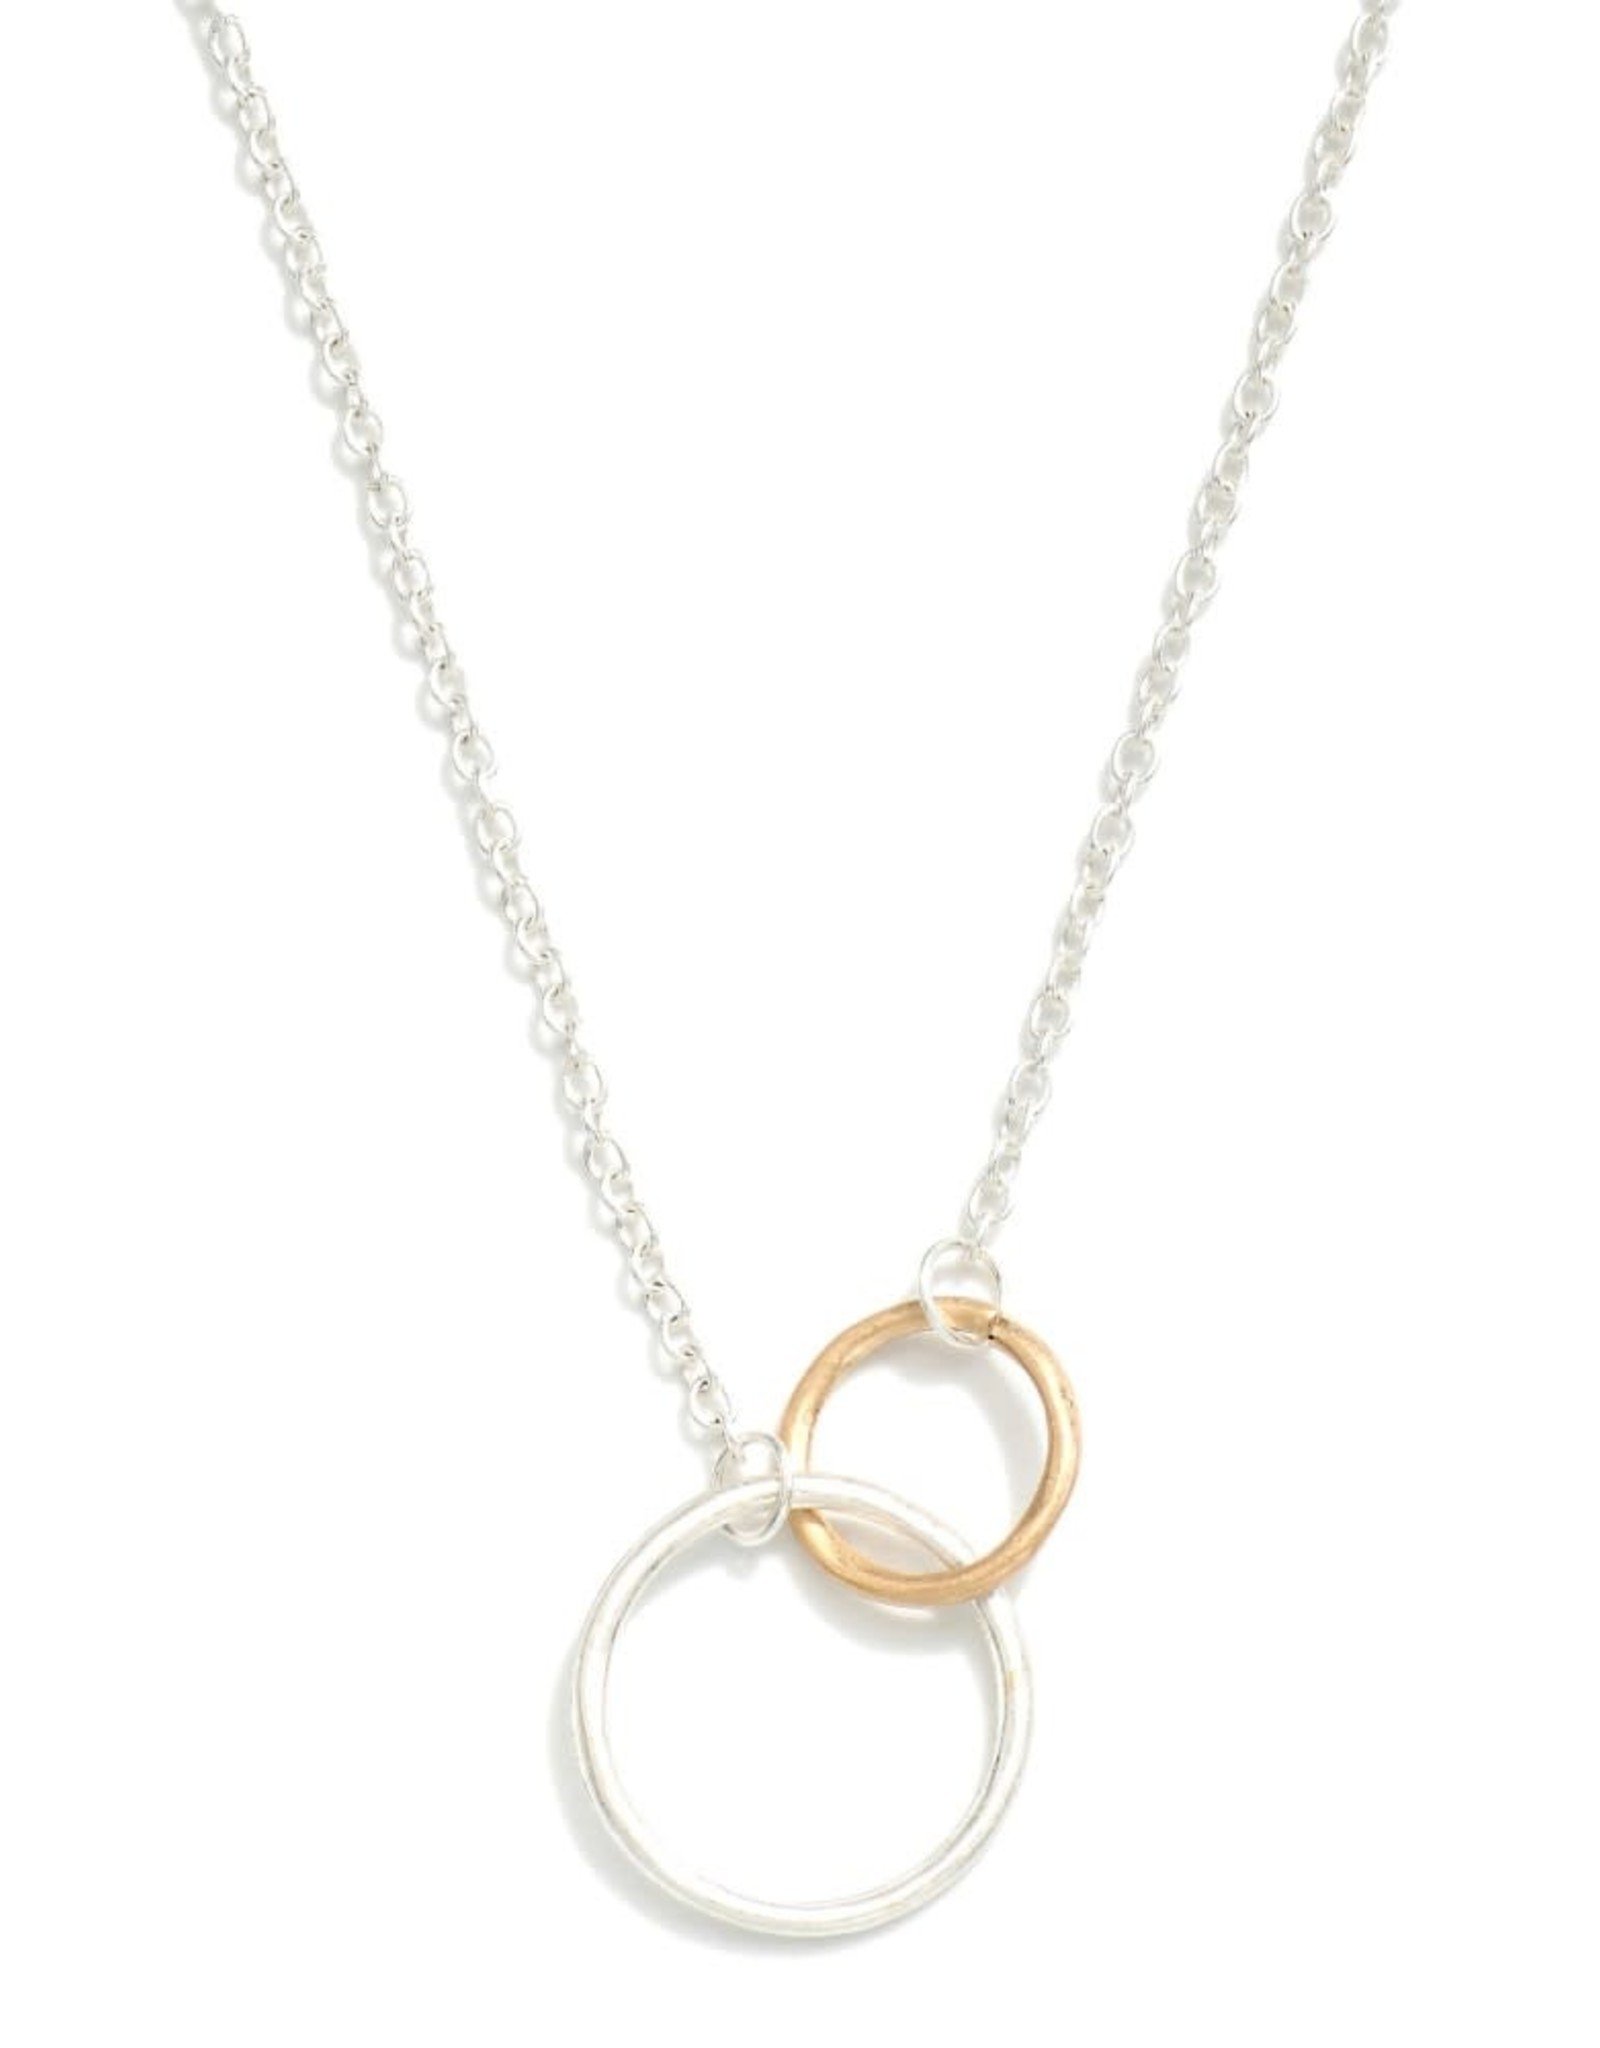 Sterling Silver 2 Circles Linked Chain Necklace | Womens jewelry necklace,  Chain link necklace, Beautiful necklaces